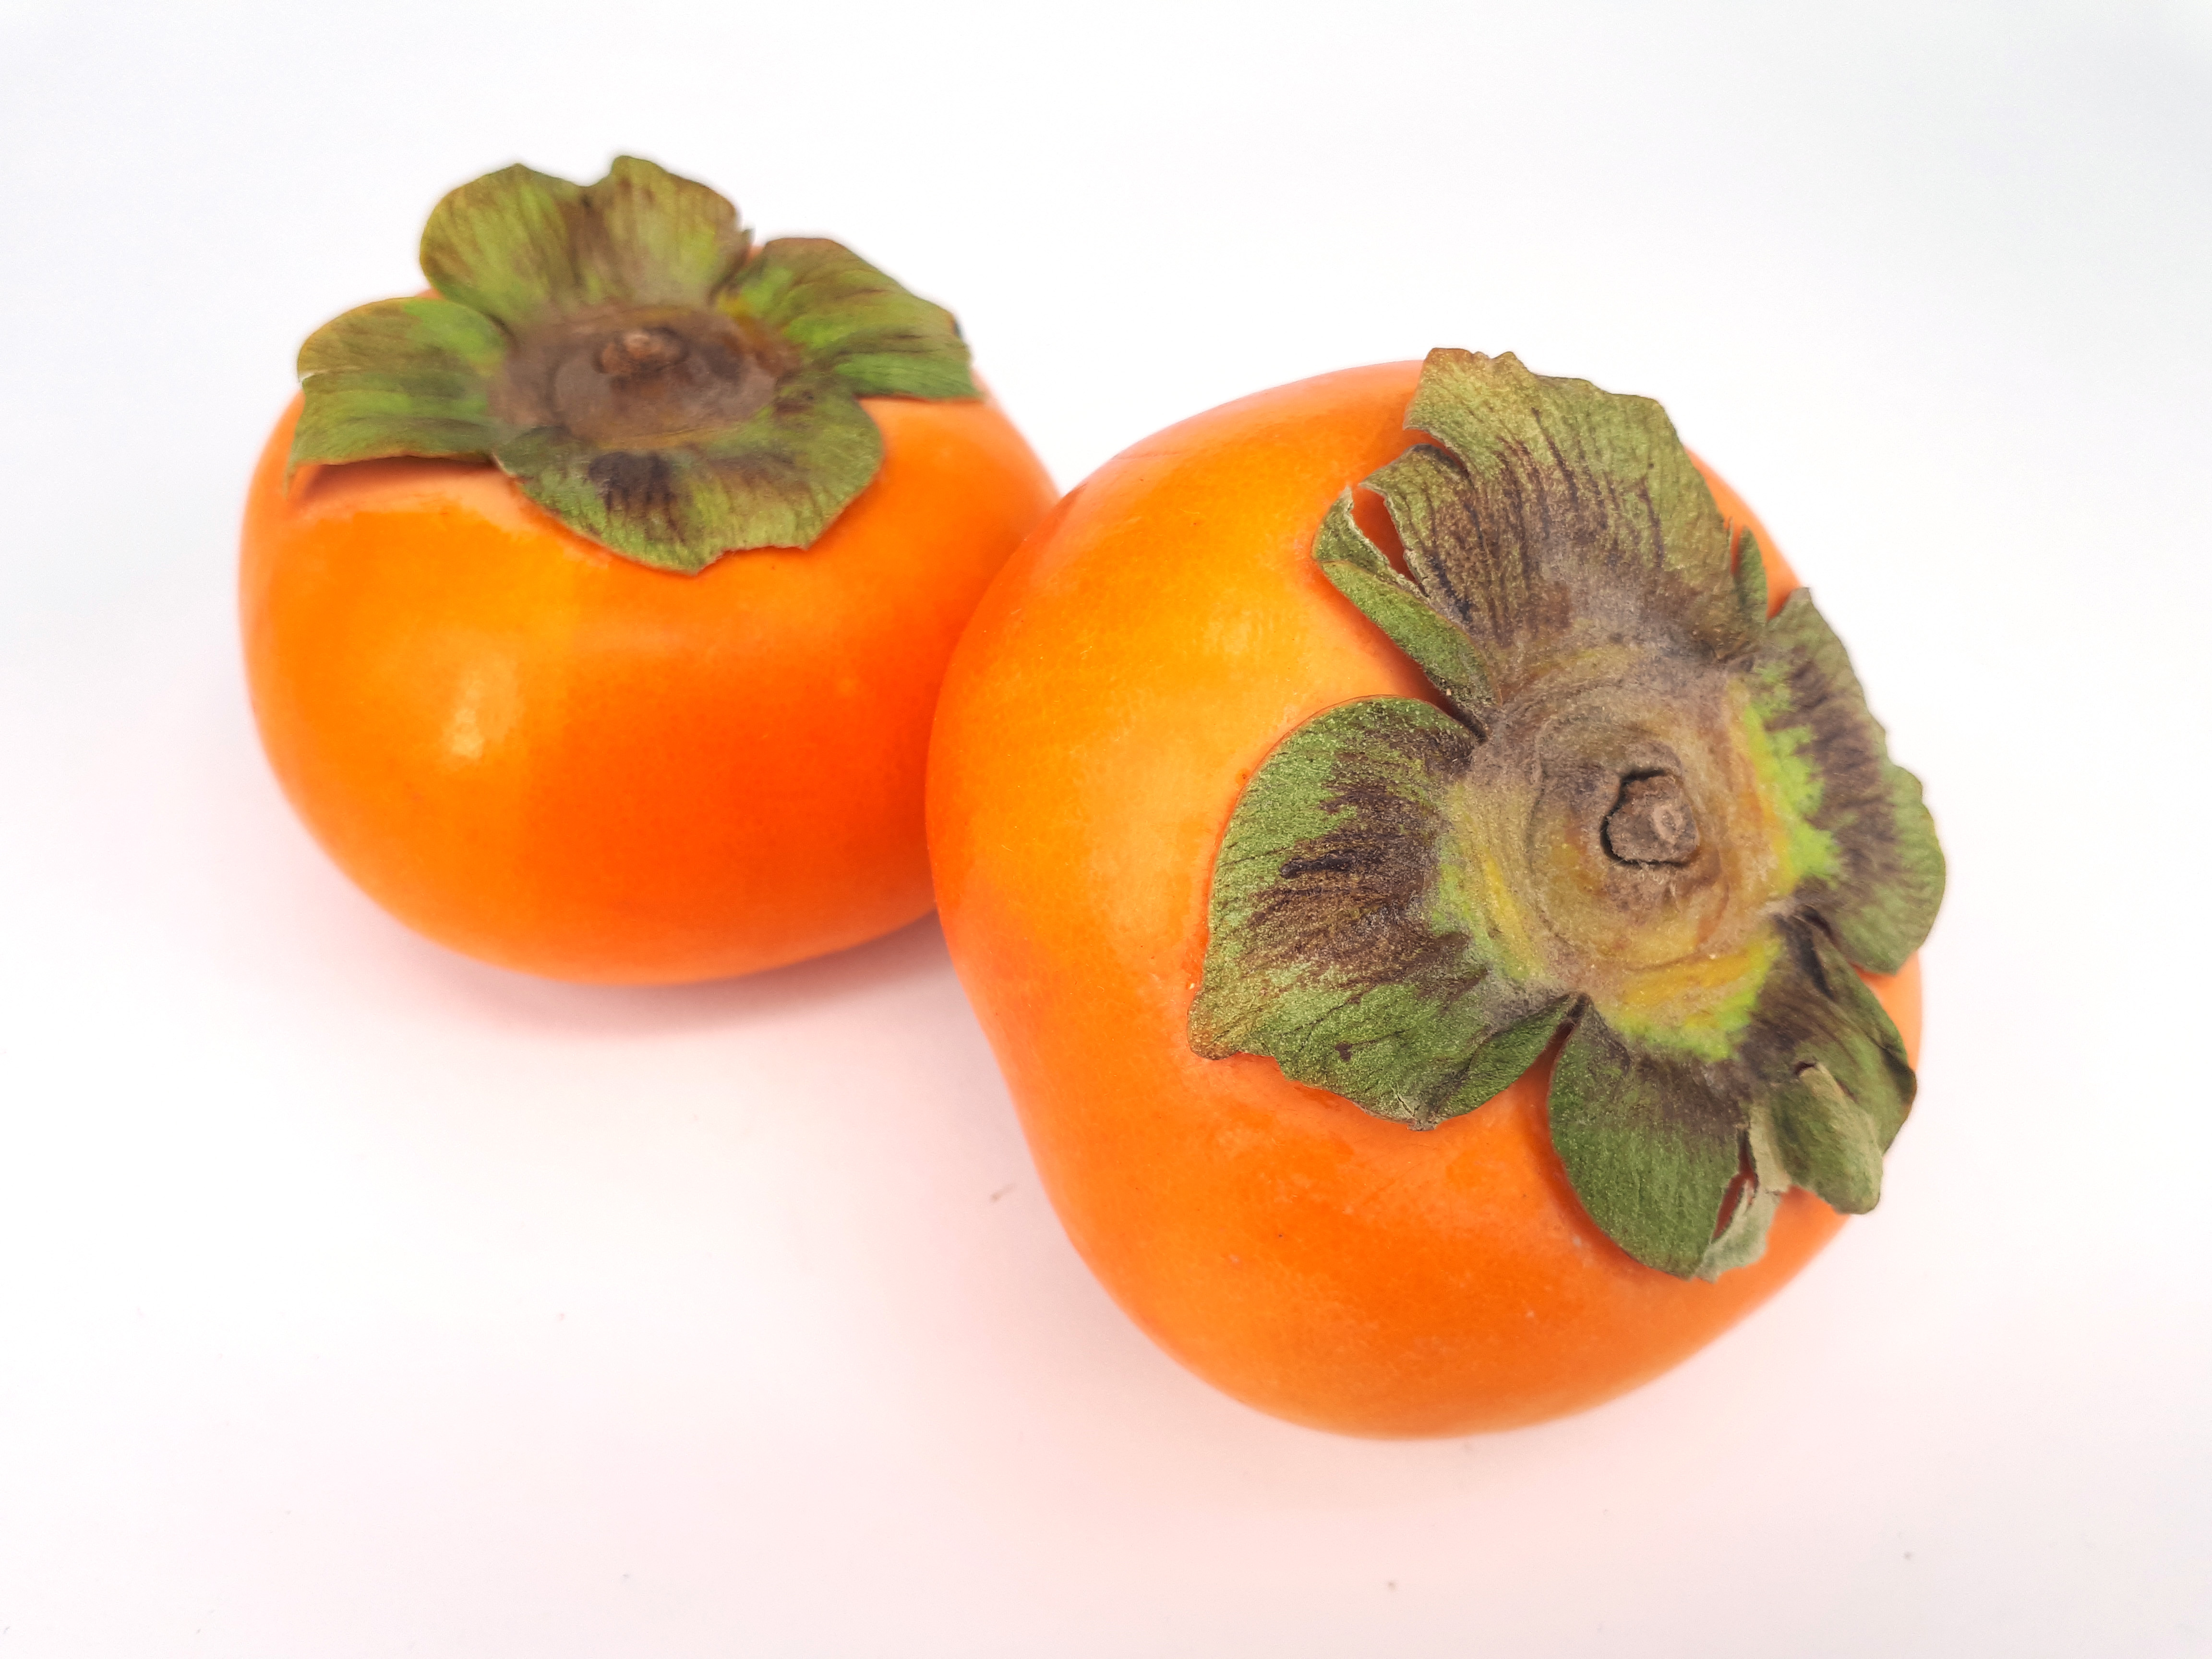 Two persimmons 2017 A3